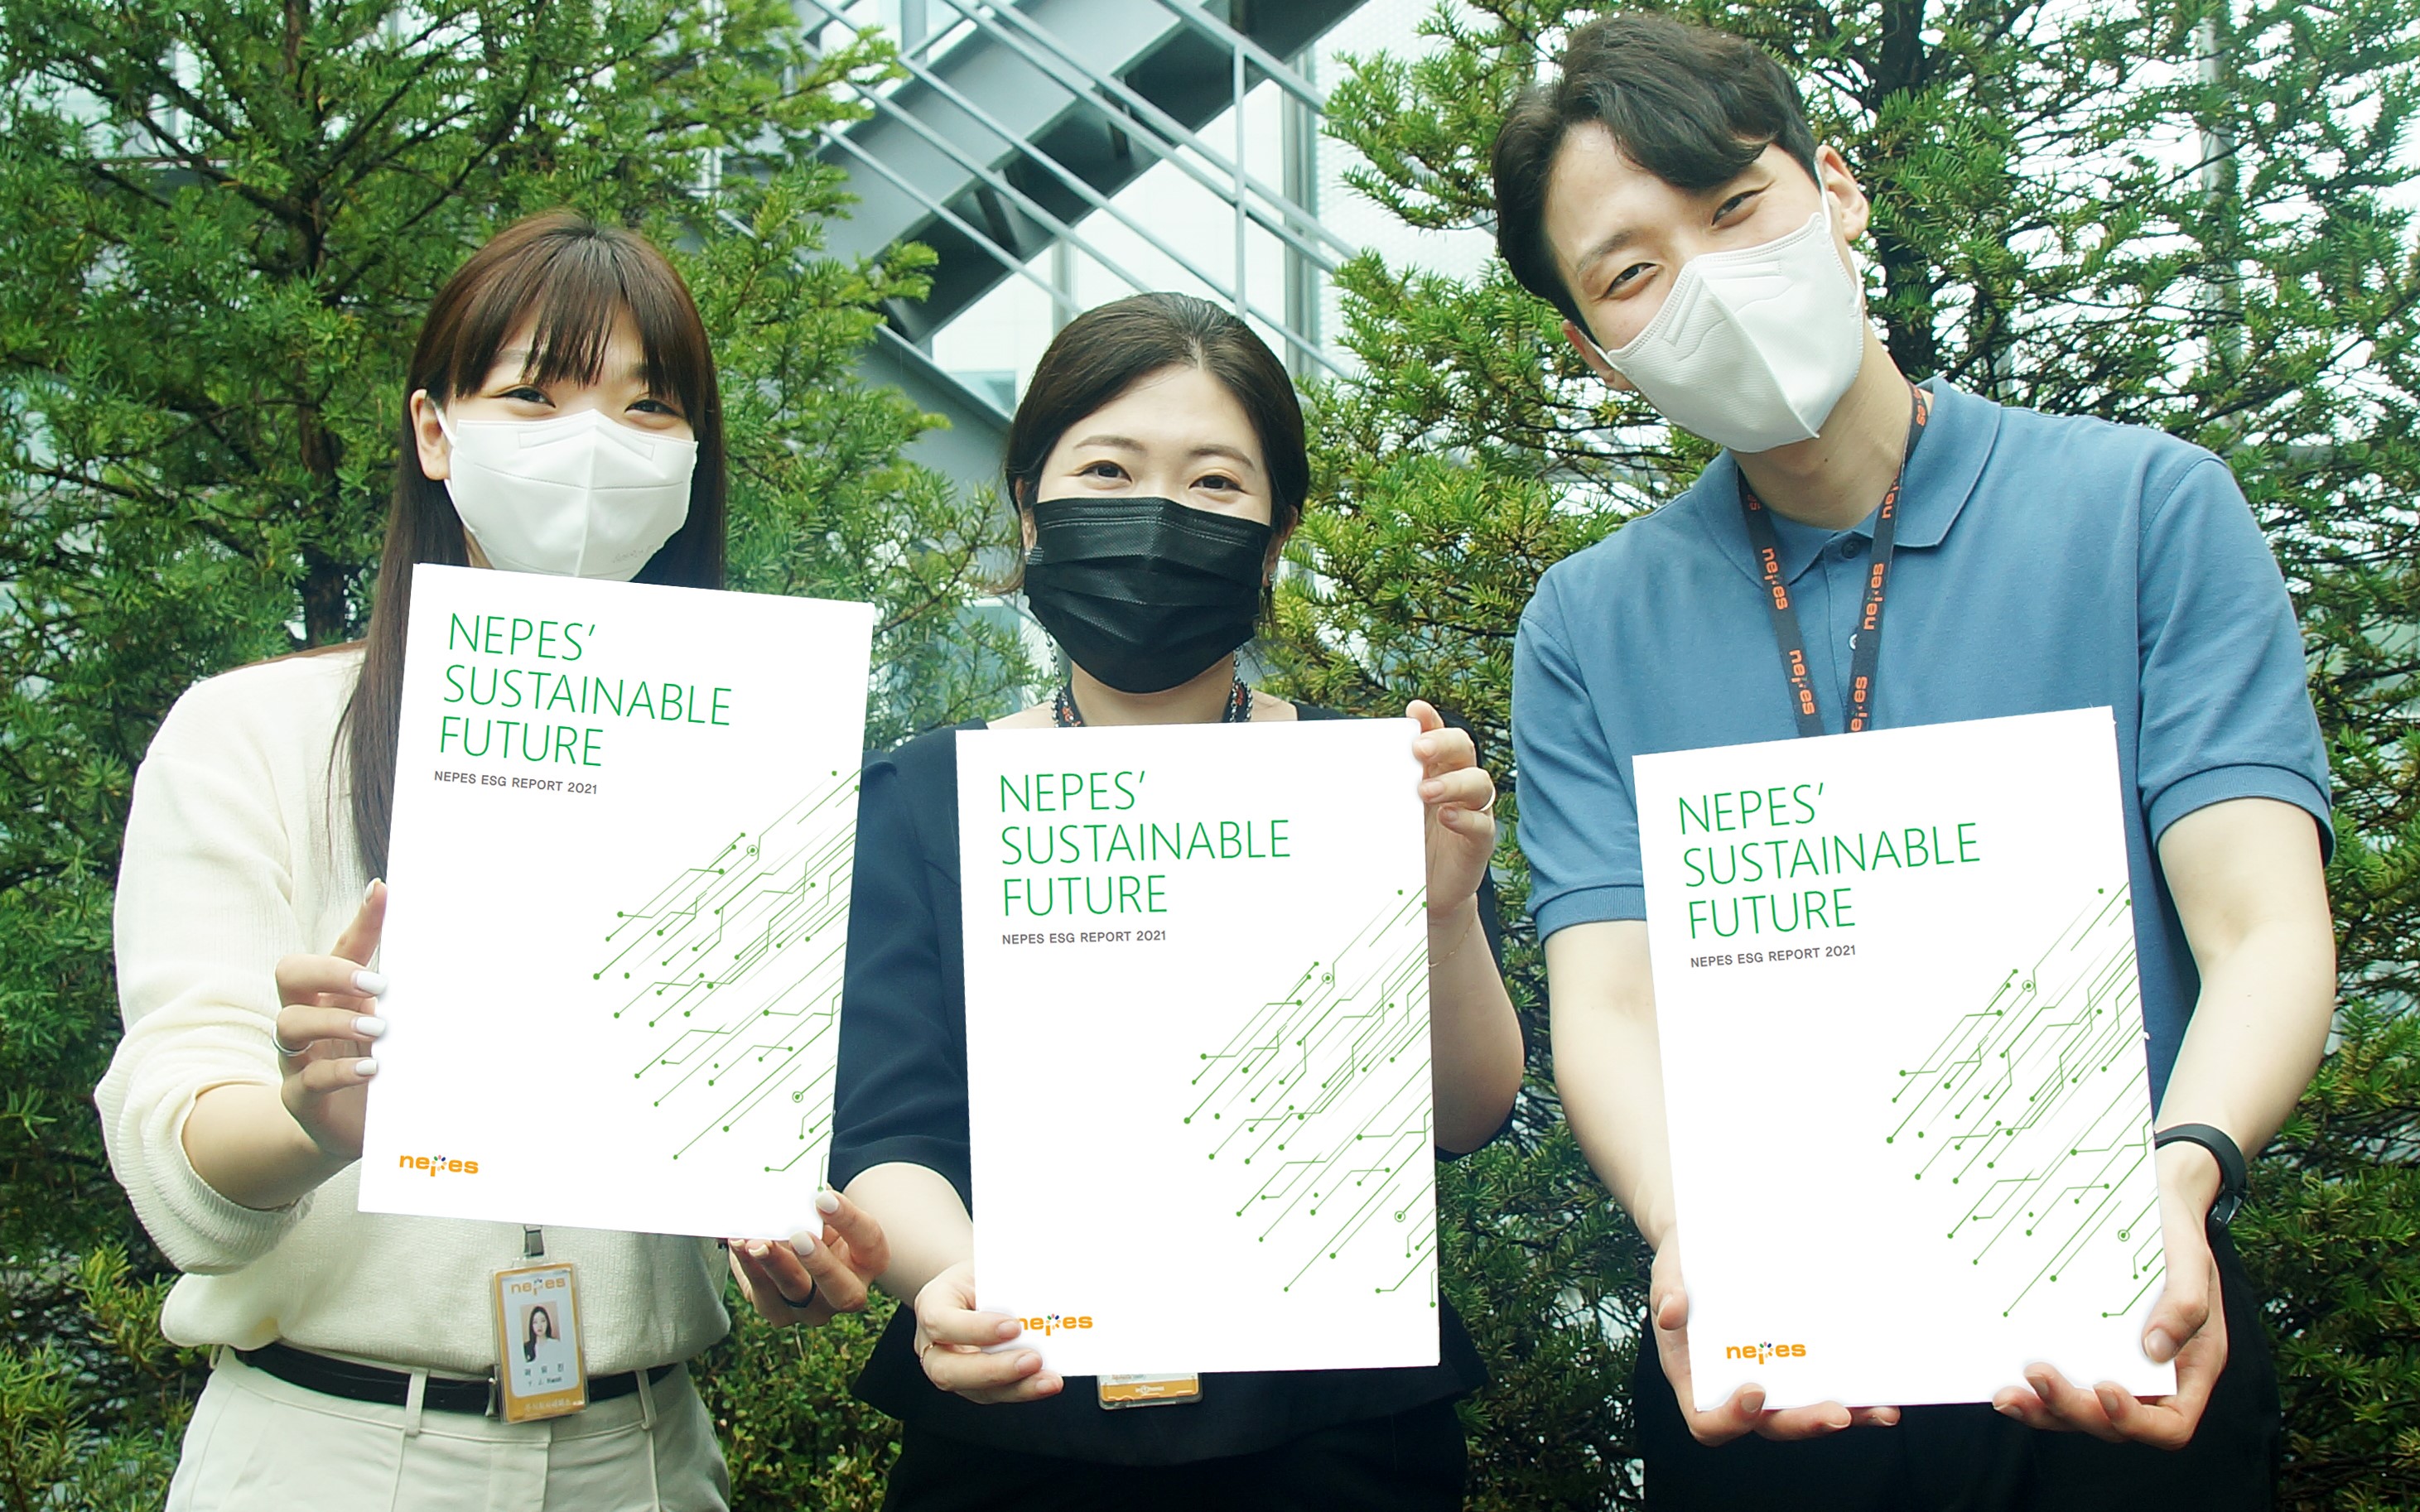 Nepes, released the first ESG report...containing 'sustainable future'  썸네일